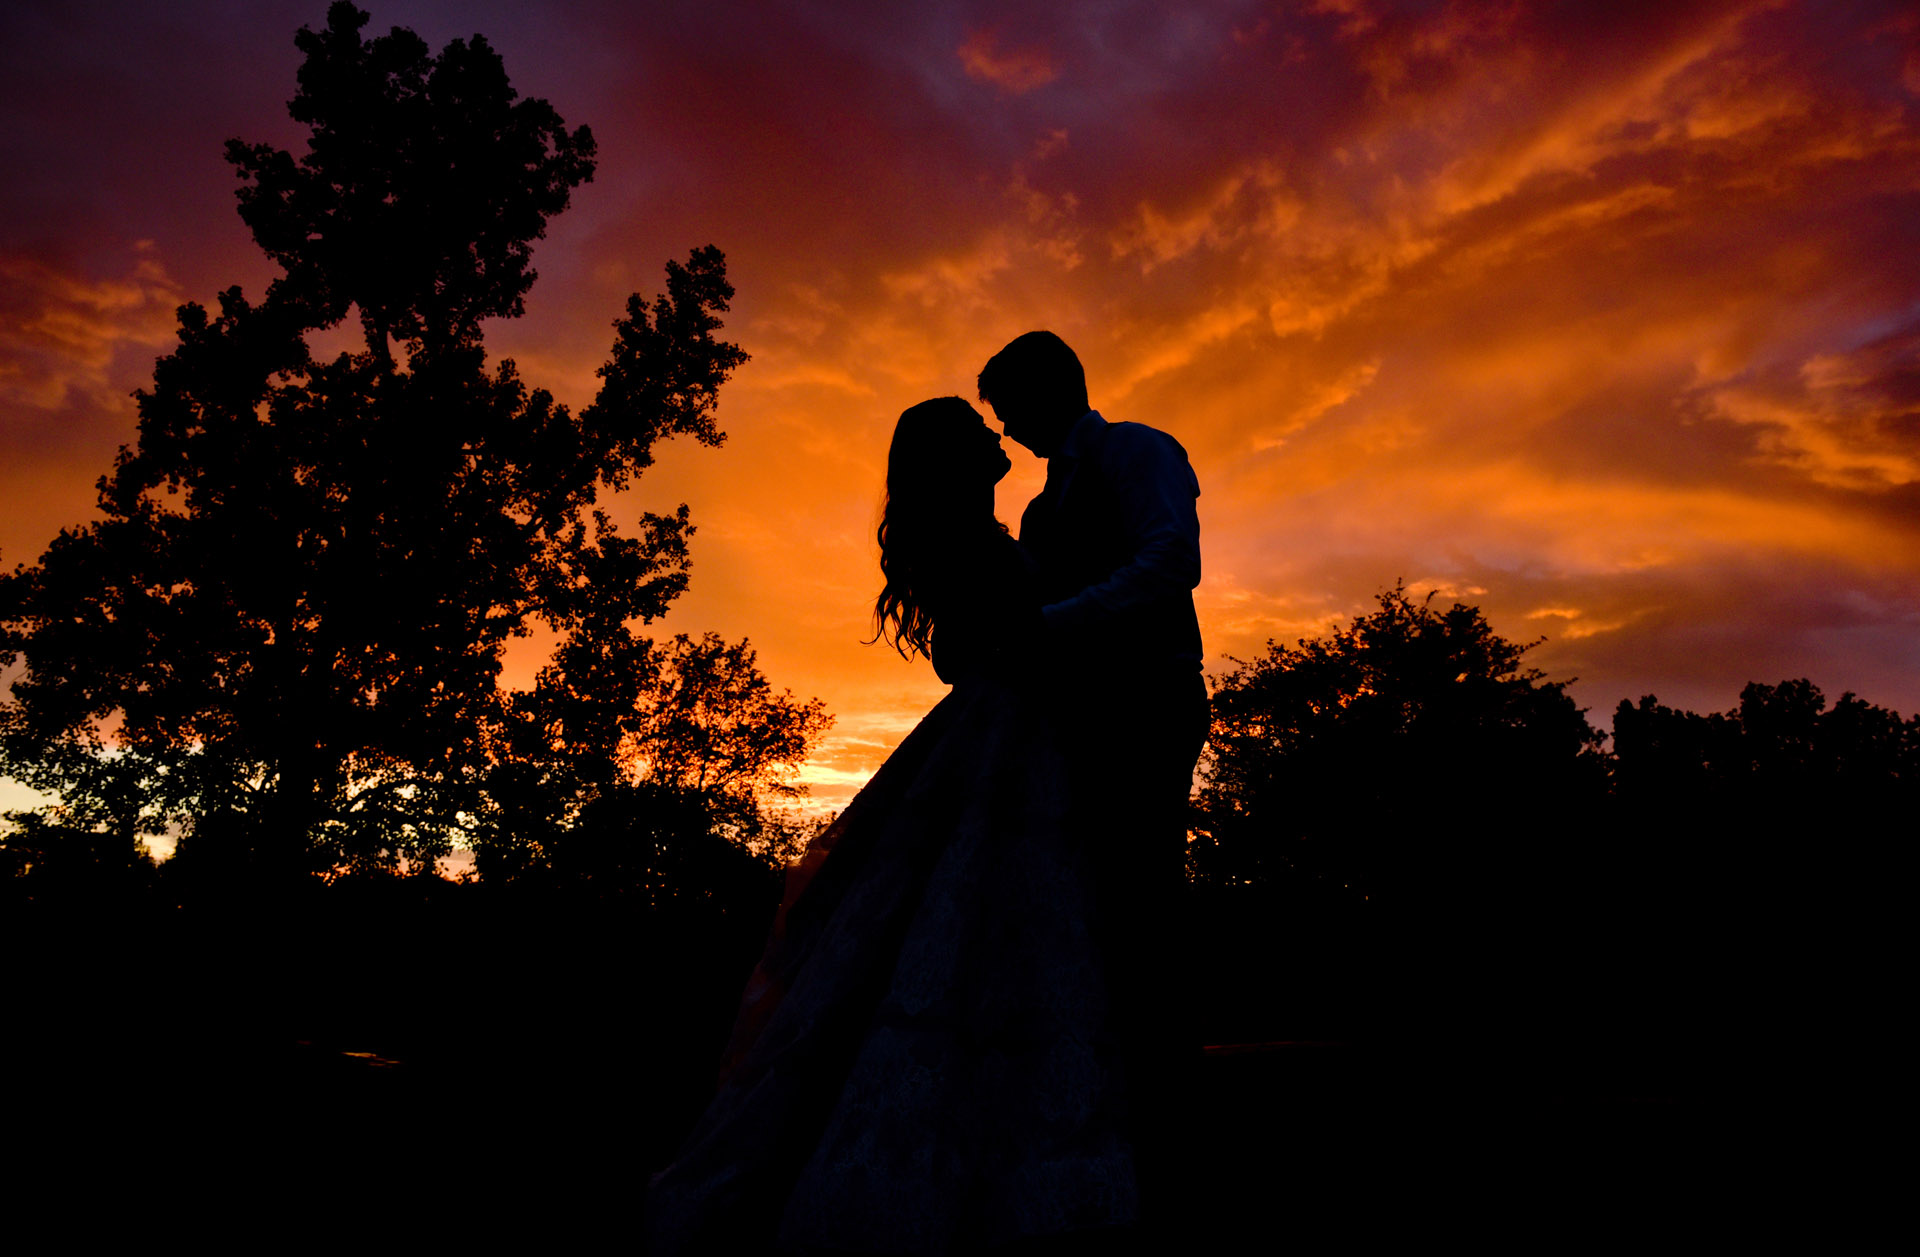 Bride and groom on top of a hill after a storm made this dramatic sunset photo at Stonebridge Golf Course in Ann Arbor, Michigan.